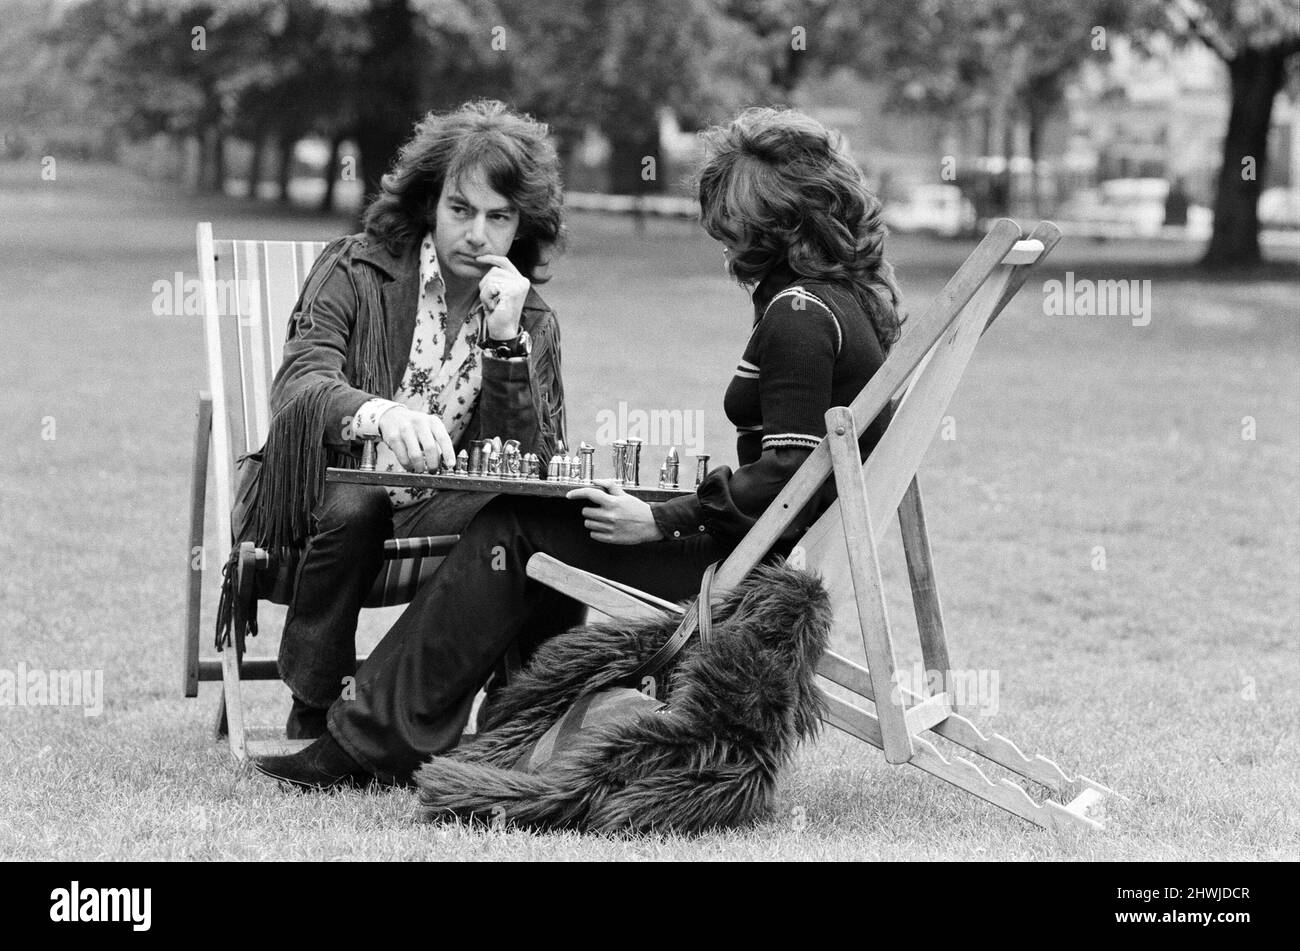 Neil Diamond, top American singer songwriter is in Britain for a month long European tour which opens this Saturday (27th May) at London's Royal Albert Hall. Pictured, he is presented with a chess set by his fan club and played with Joy Anderson in Kensington Gardens. 25th May 1972. Stock Photo